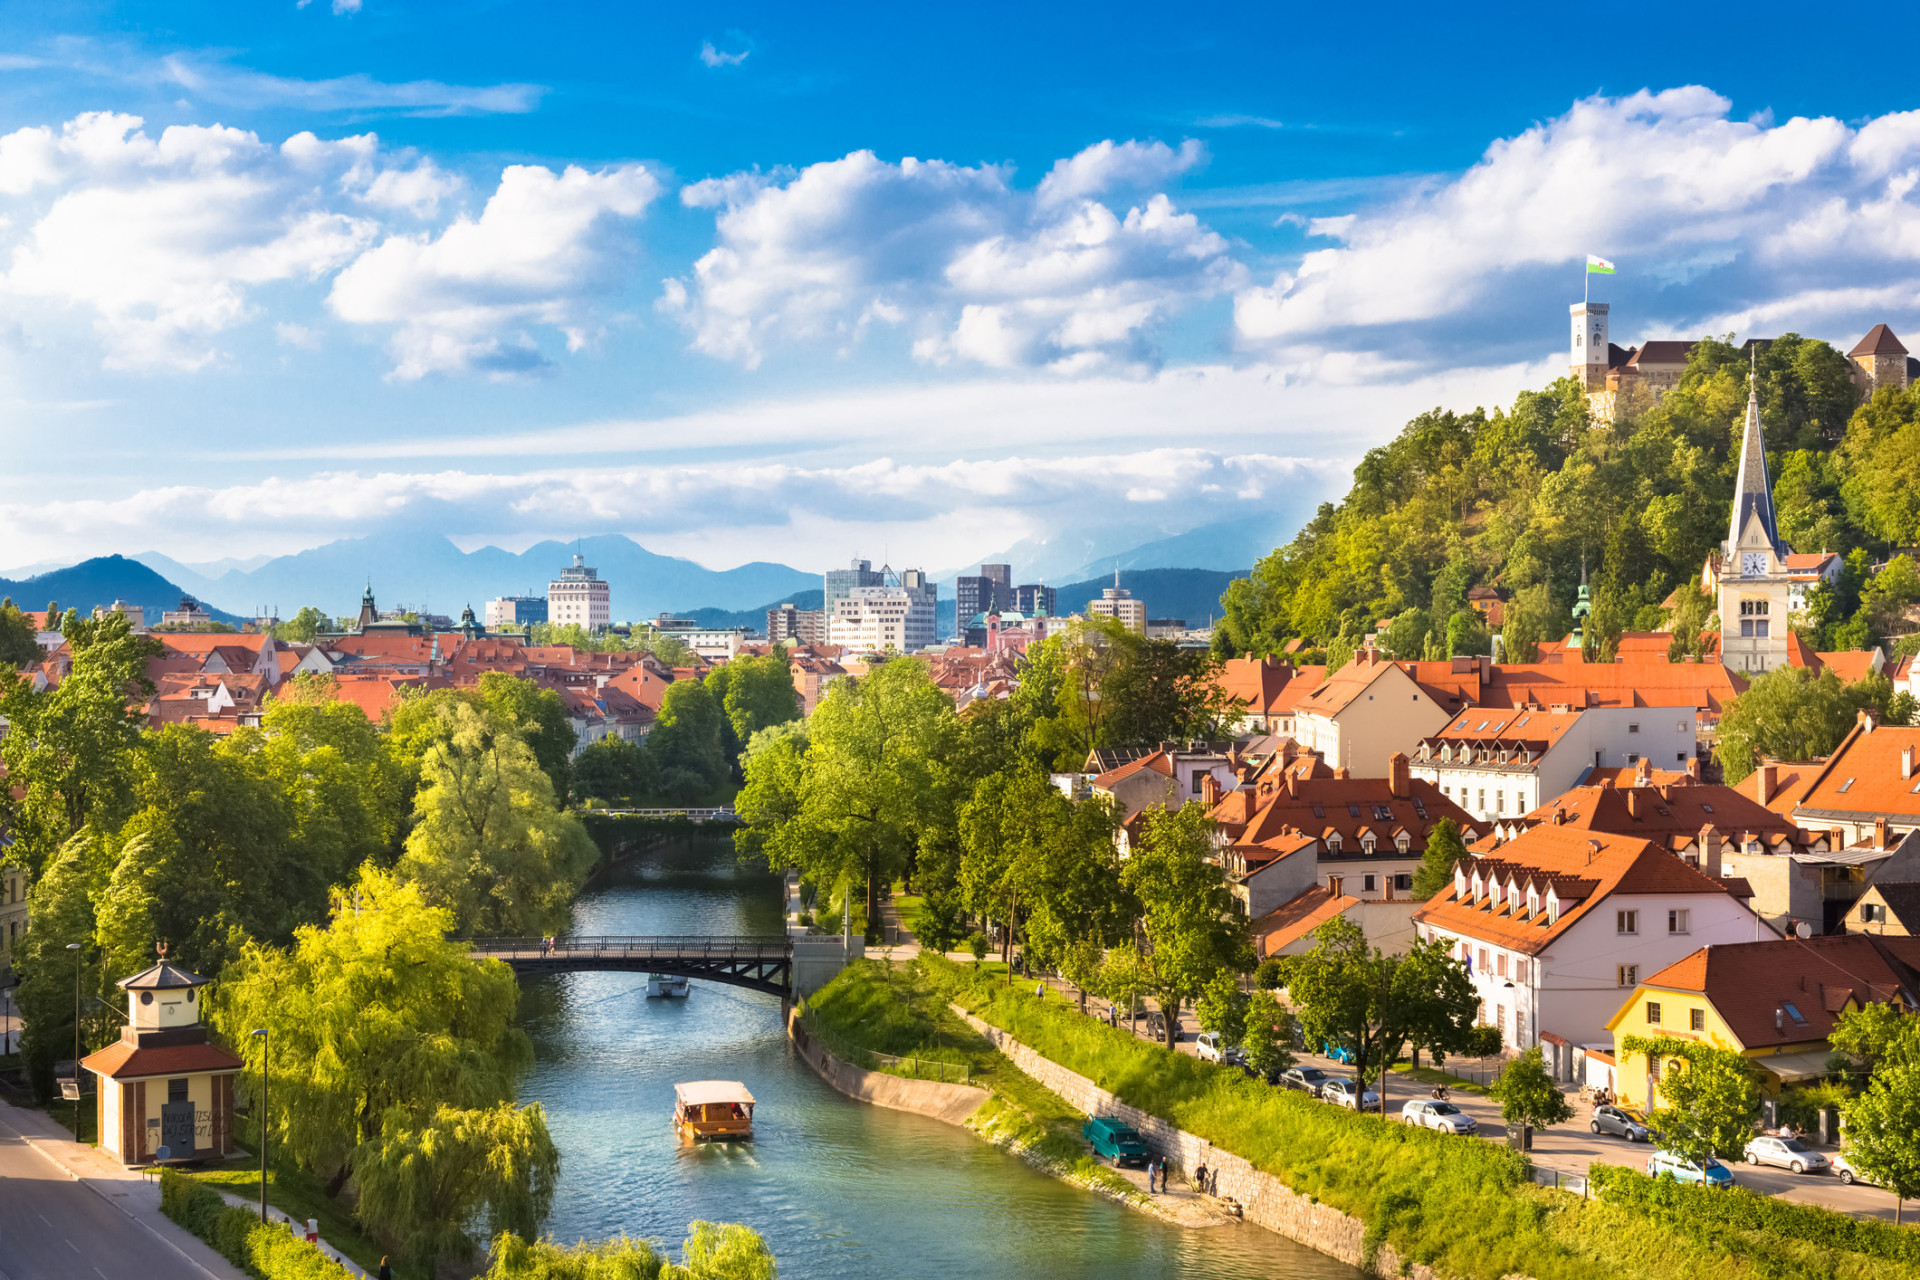 The Slovenian capital is still relatively under the radar when it comes to tourists, which makes it a peaceful and beautiful city to explore on your own.<p><a href="https://www.msn.com/en-us/community/channel/vid-7xx8mnucu55yw63we9va2gwr7uihbxwc68fxqp25x6tg4ftibpra?cvid=94631541bc0f4f89bfd59158d696ad7e">Follow us and access great exclusive content every day</a></p>